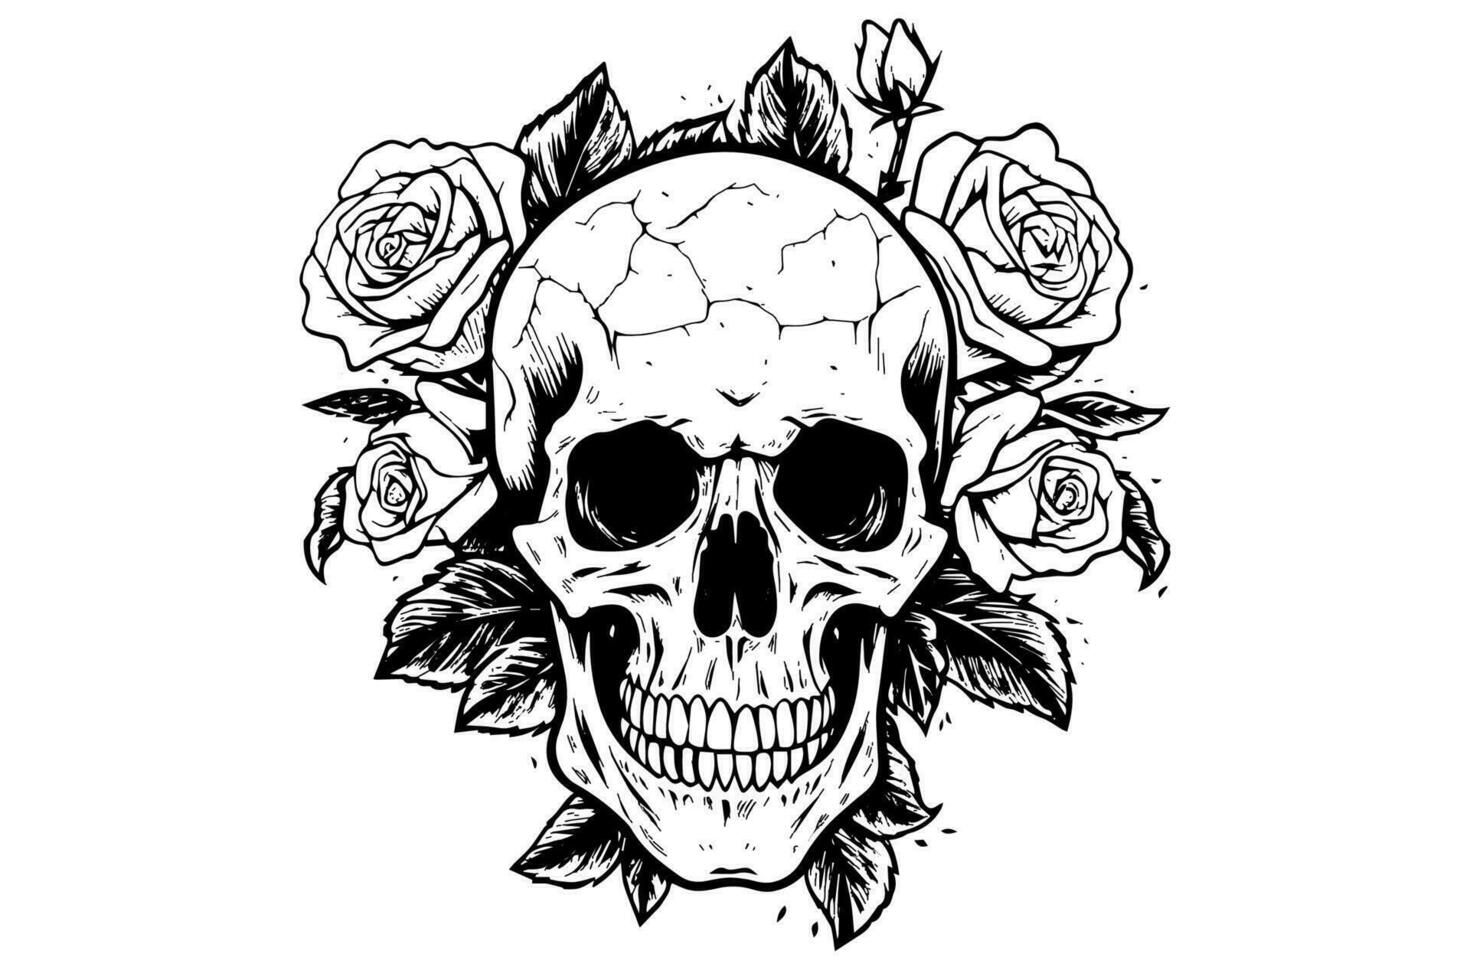 Human skull in a flower frame woodcut style. Vector engraving sketch illustration for tattoo and print design.